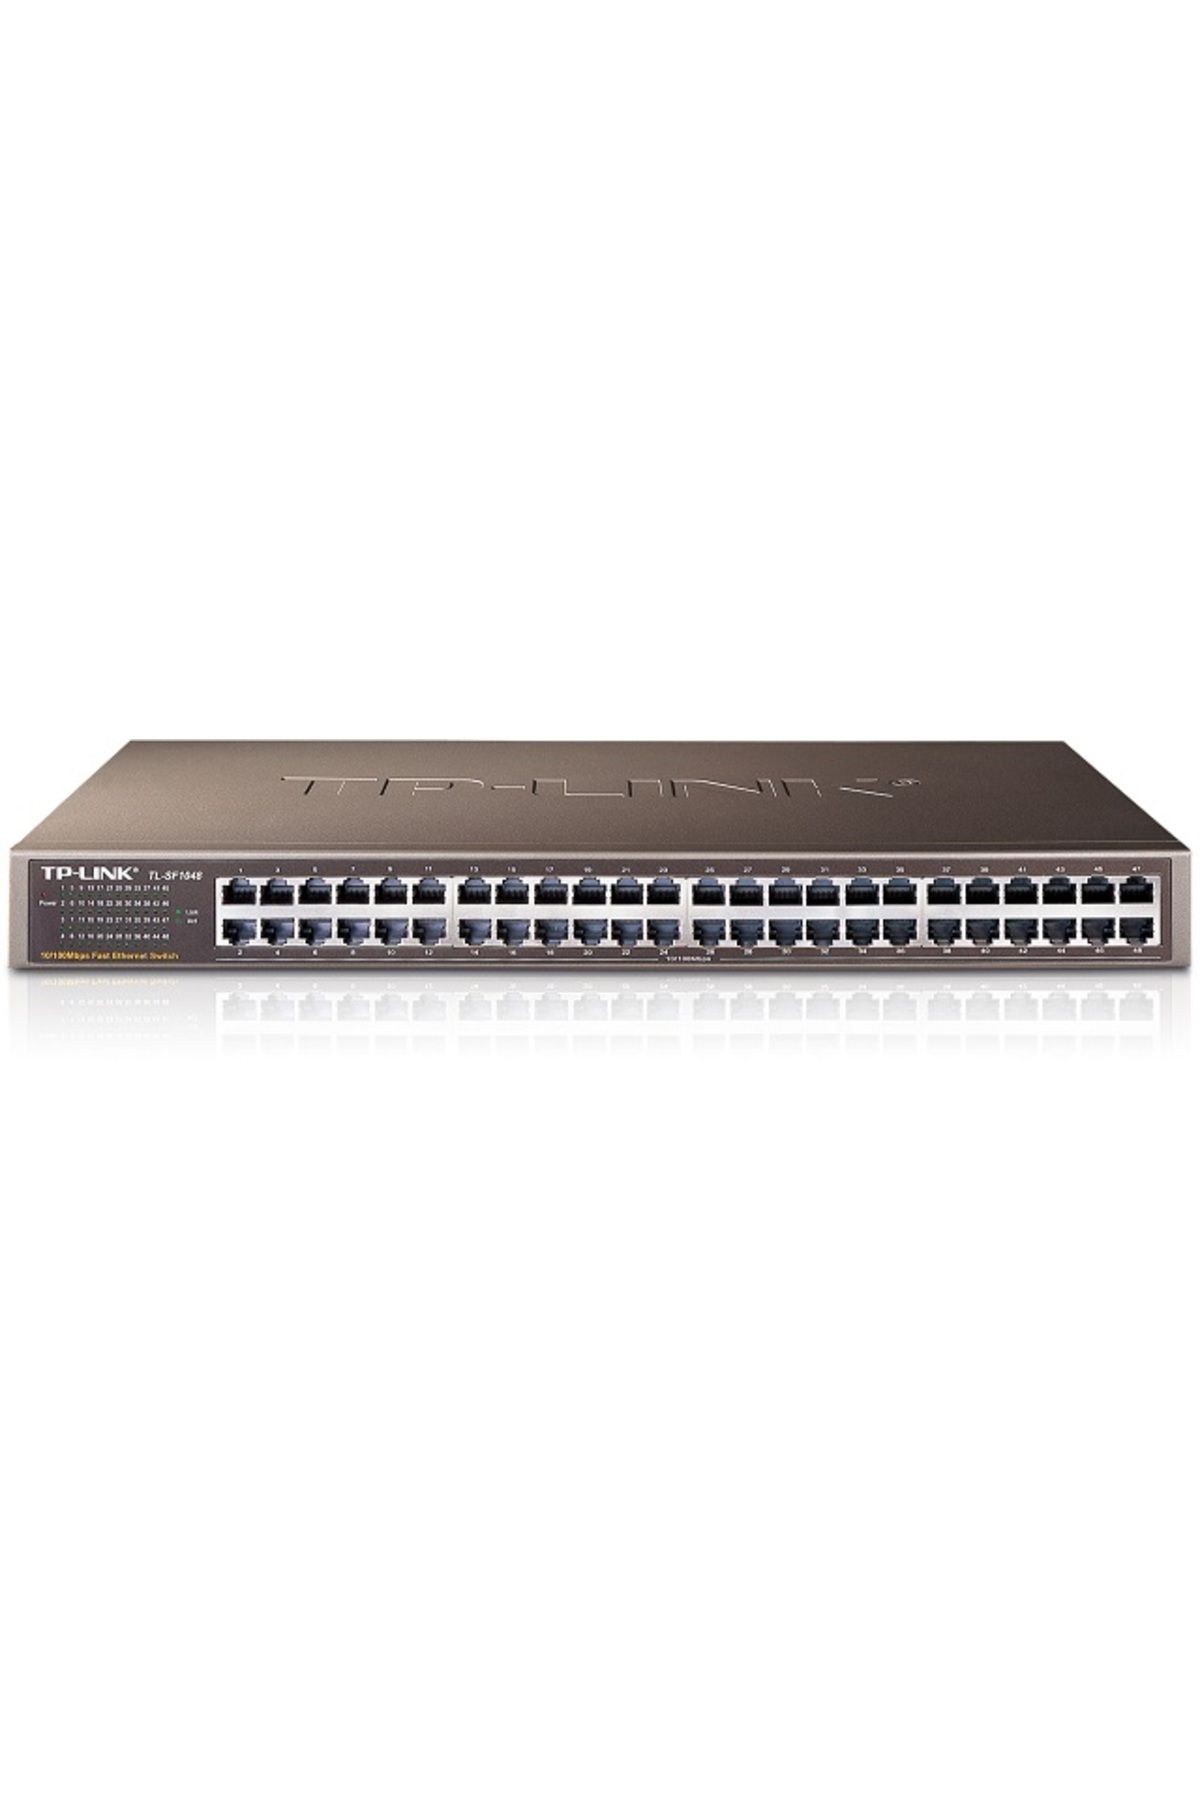 Tp-Link 48Port TL-SF1048 10/100Mbps RackMount Switch